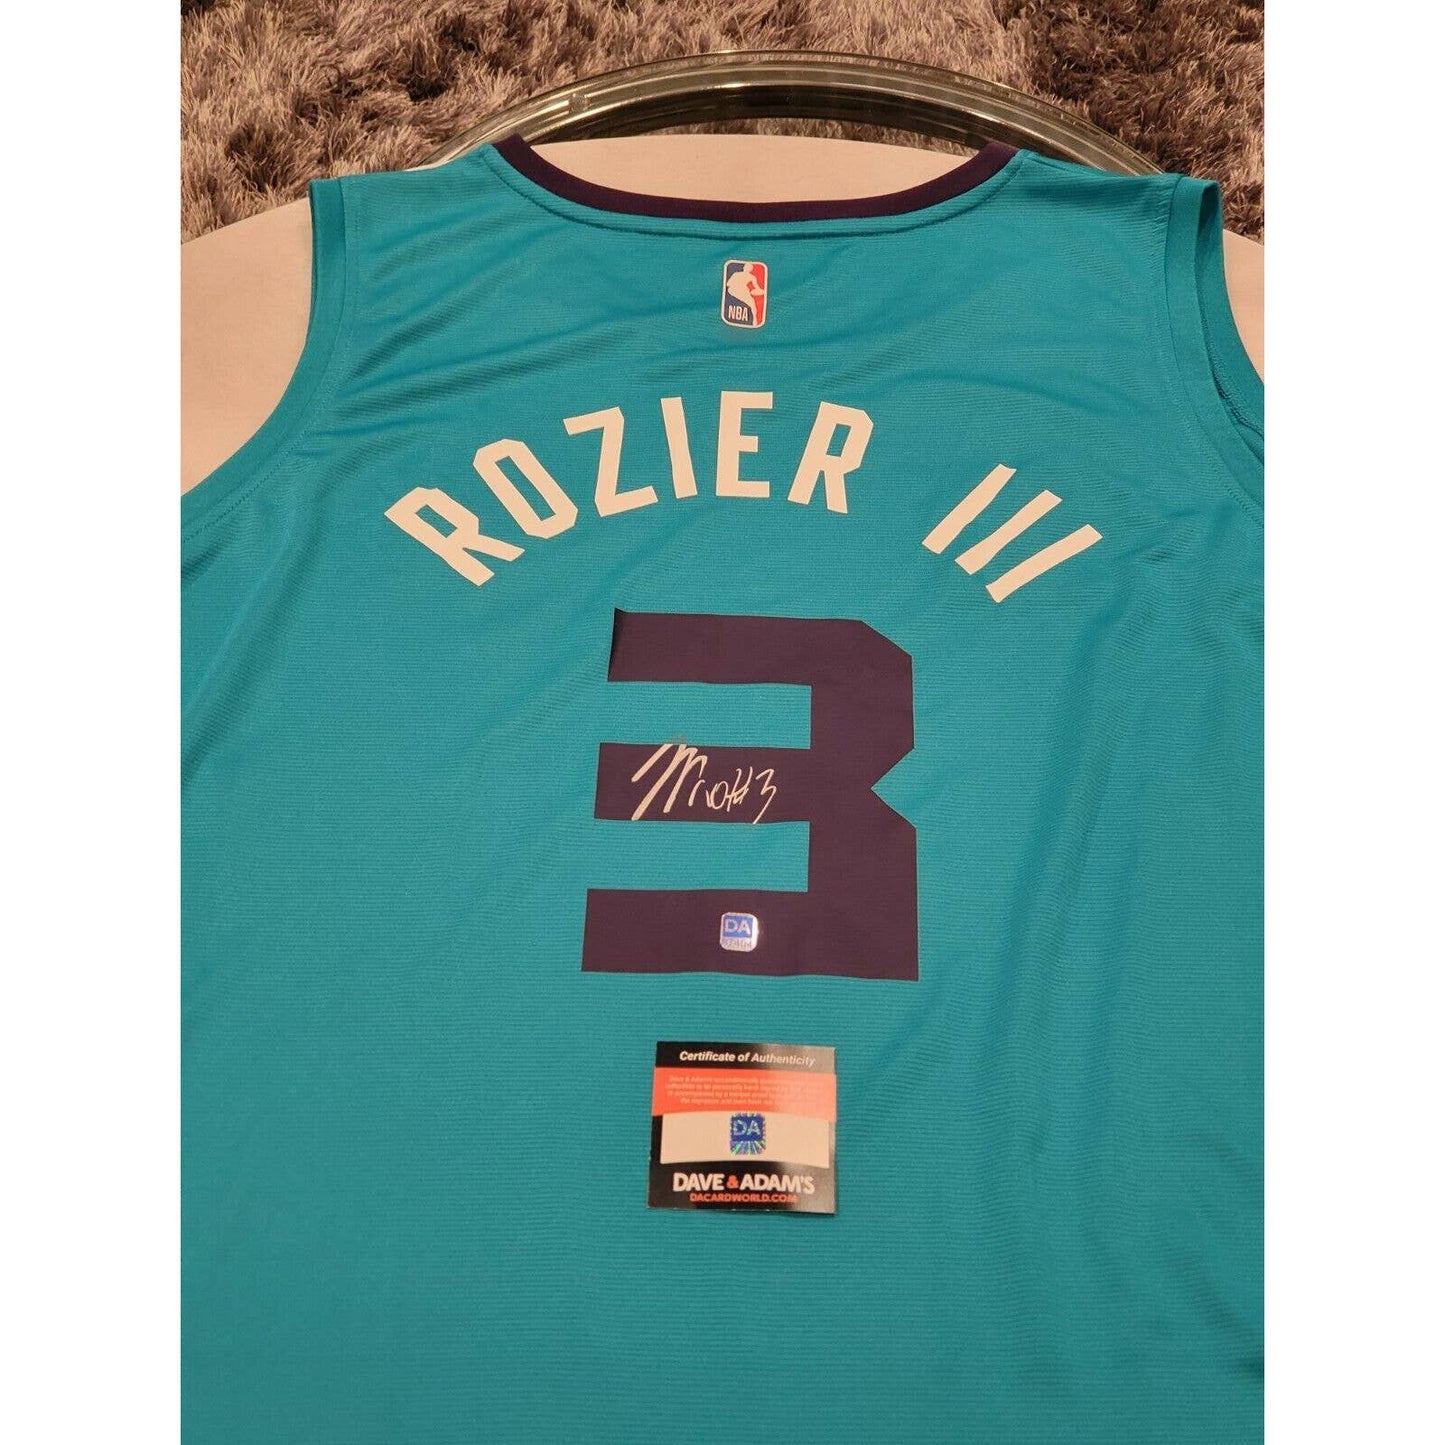 Terry Rozier Autographed/Signed Jersey COA Charlotte Hornets - TreasuresEvolved